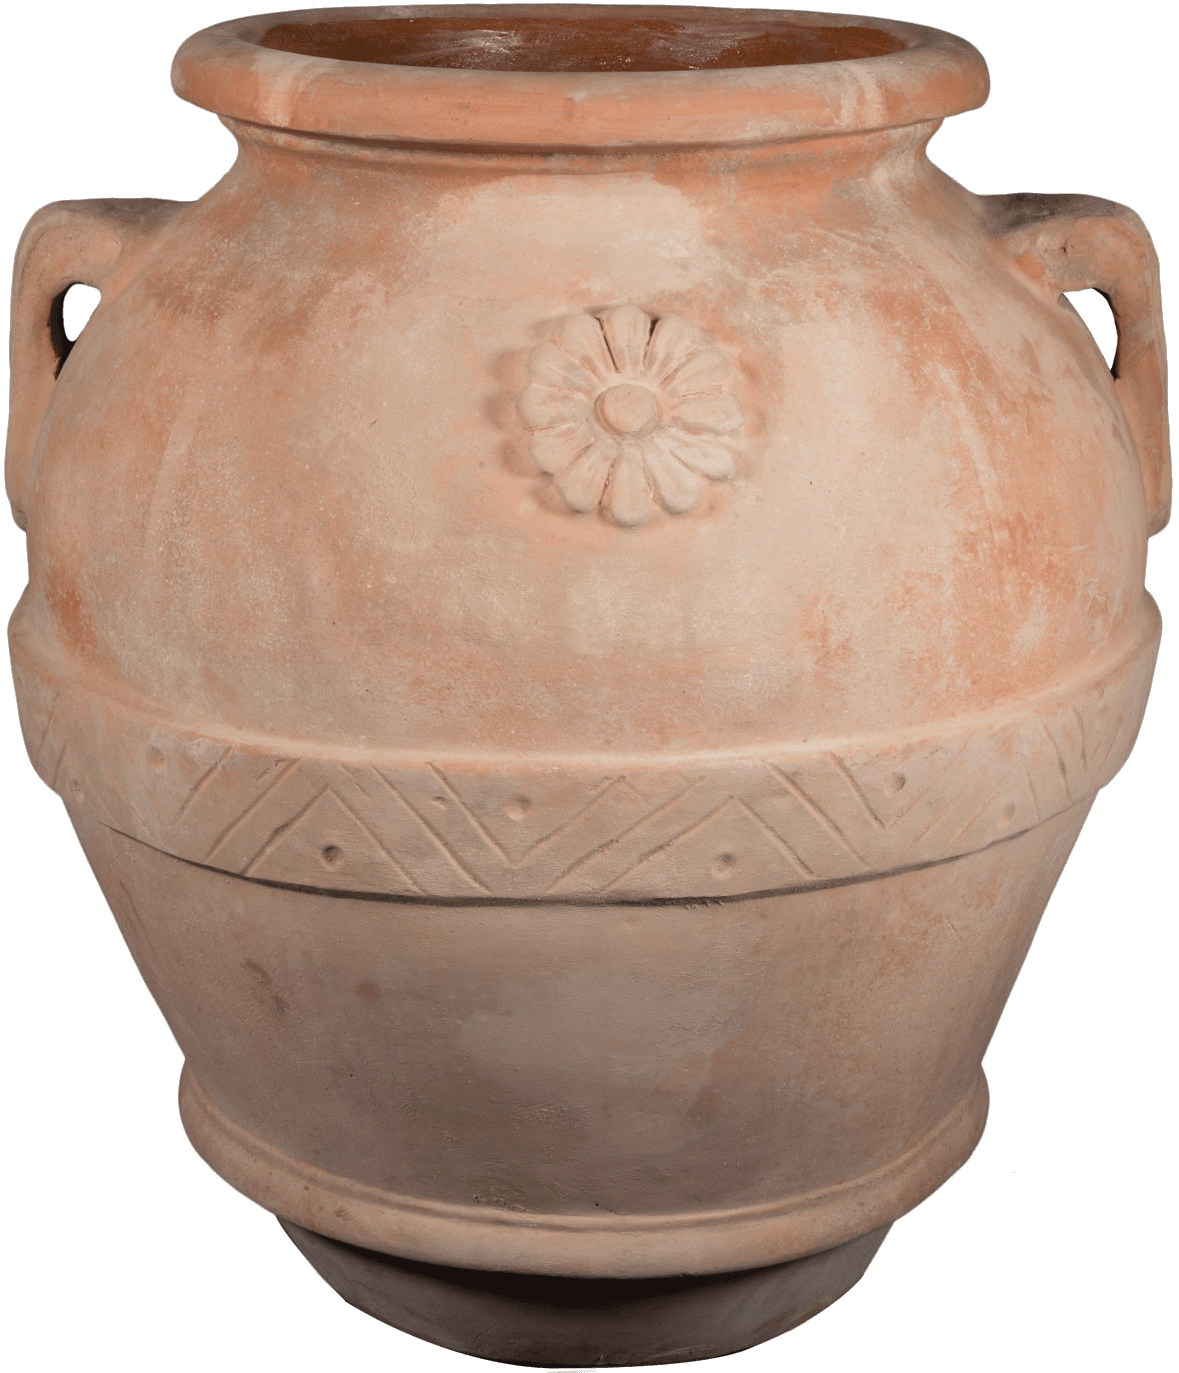  Antique Terracotta Pots  from Siena Italy Vintage 